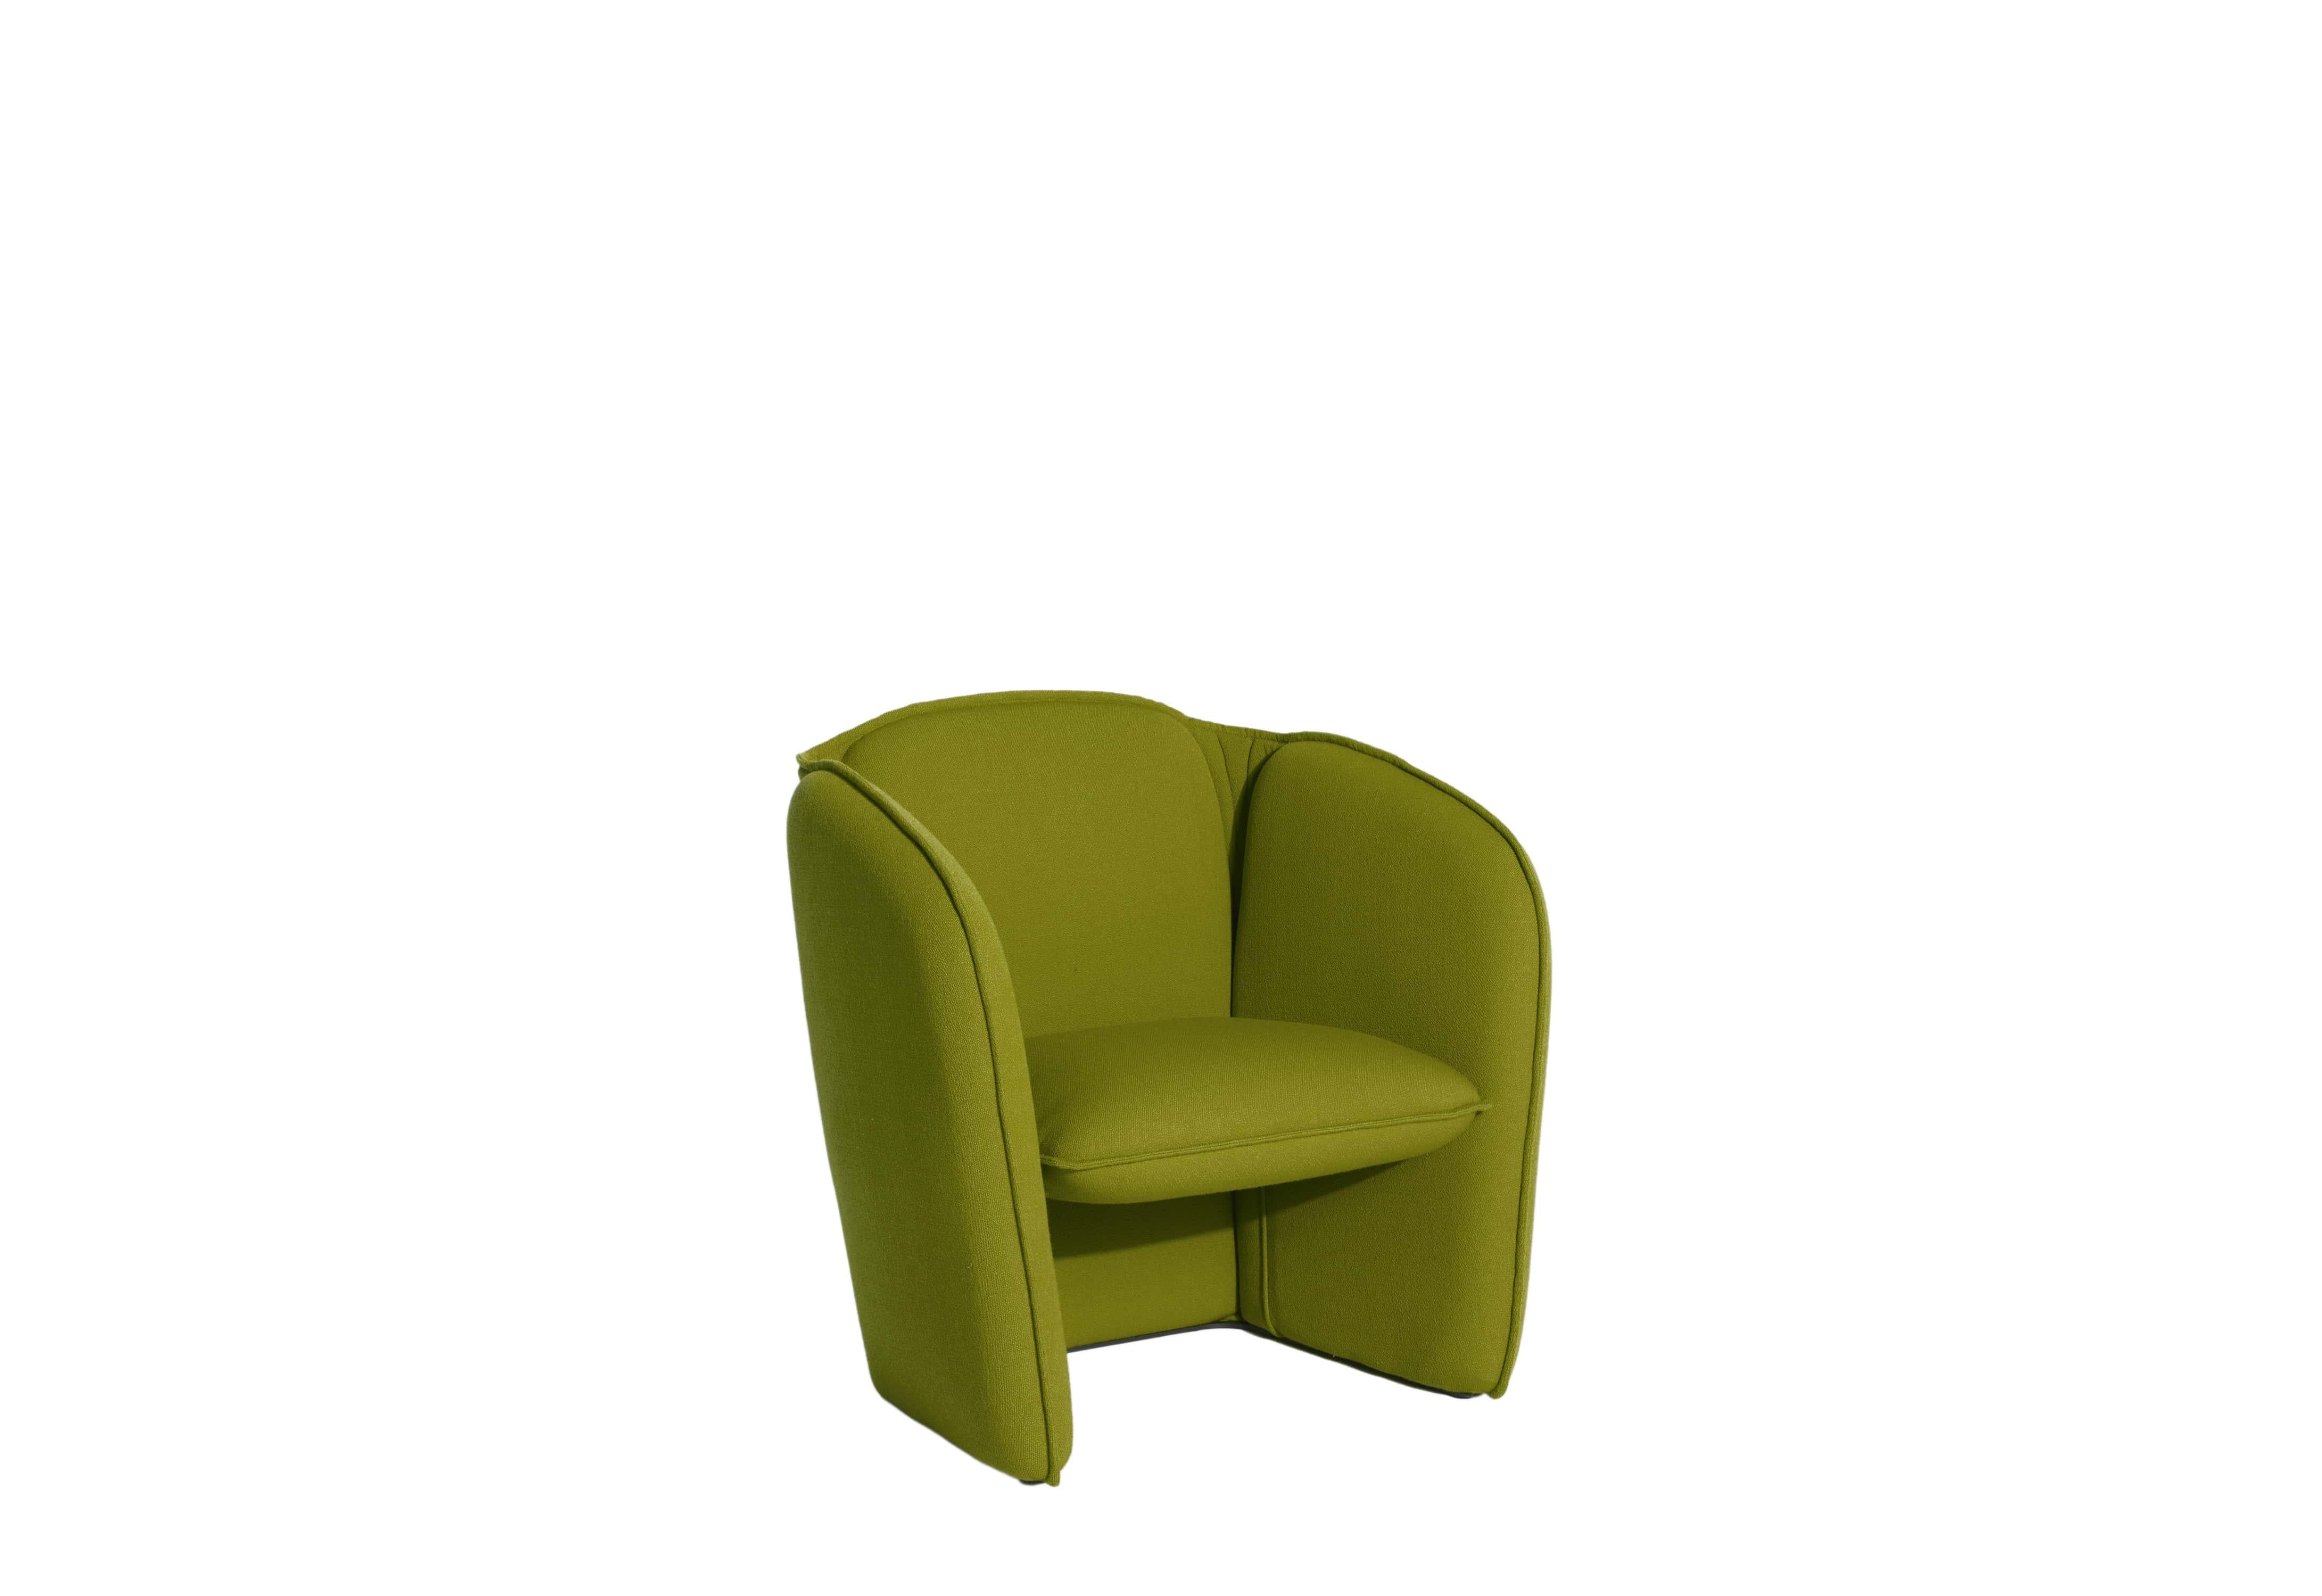 Petite Friture Lily Armchair in Olive Green by Färg & Blanche, 2022

A comprehensive collection comprising a sofa and armchair. With impeccable, concise proportions, and smooth and organic contours for a hospitable feel.

Established in